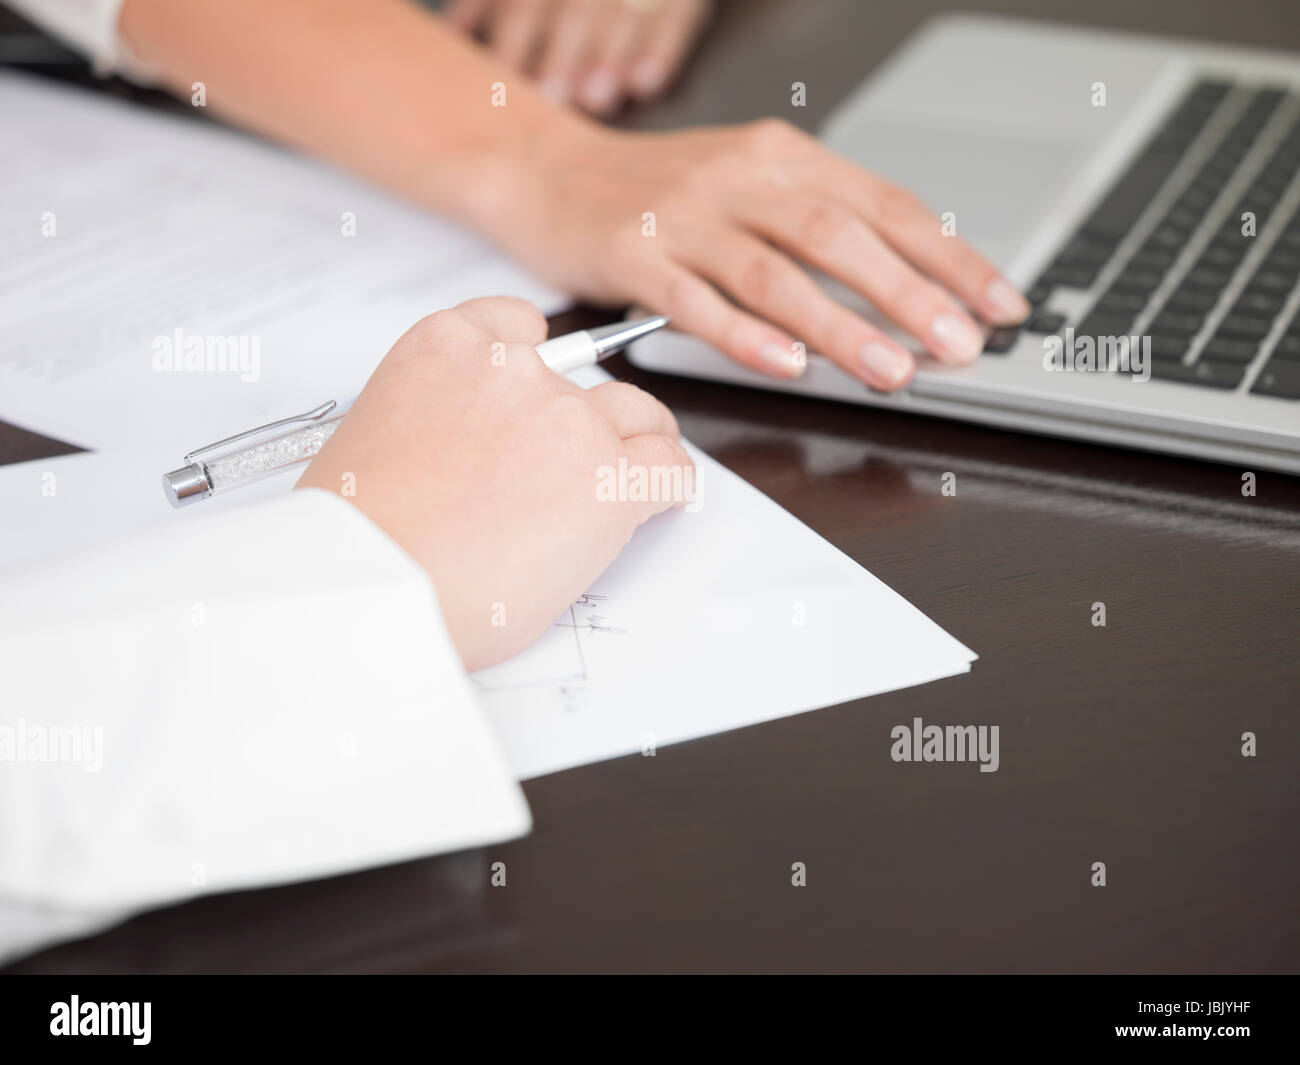 awyers researching a case or preparing  casestudy Stock Photo